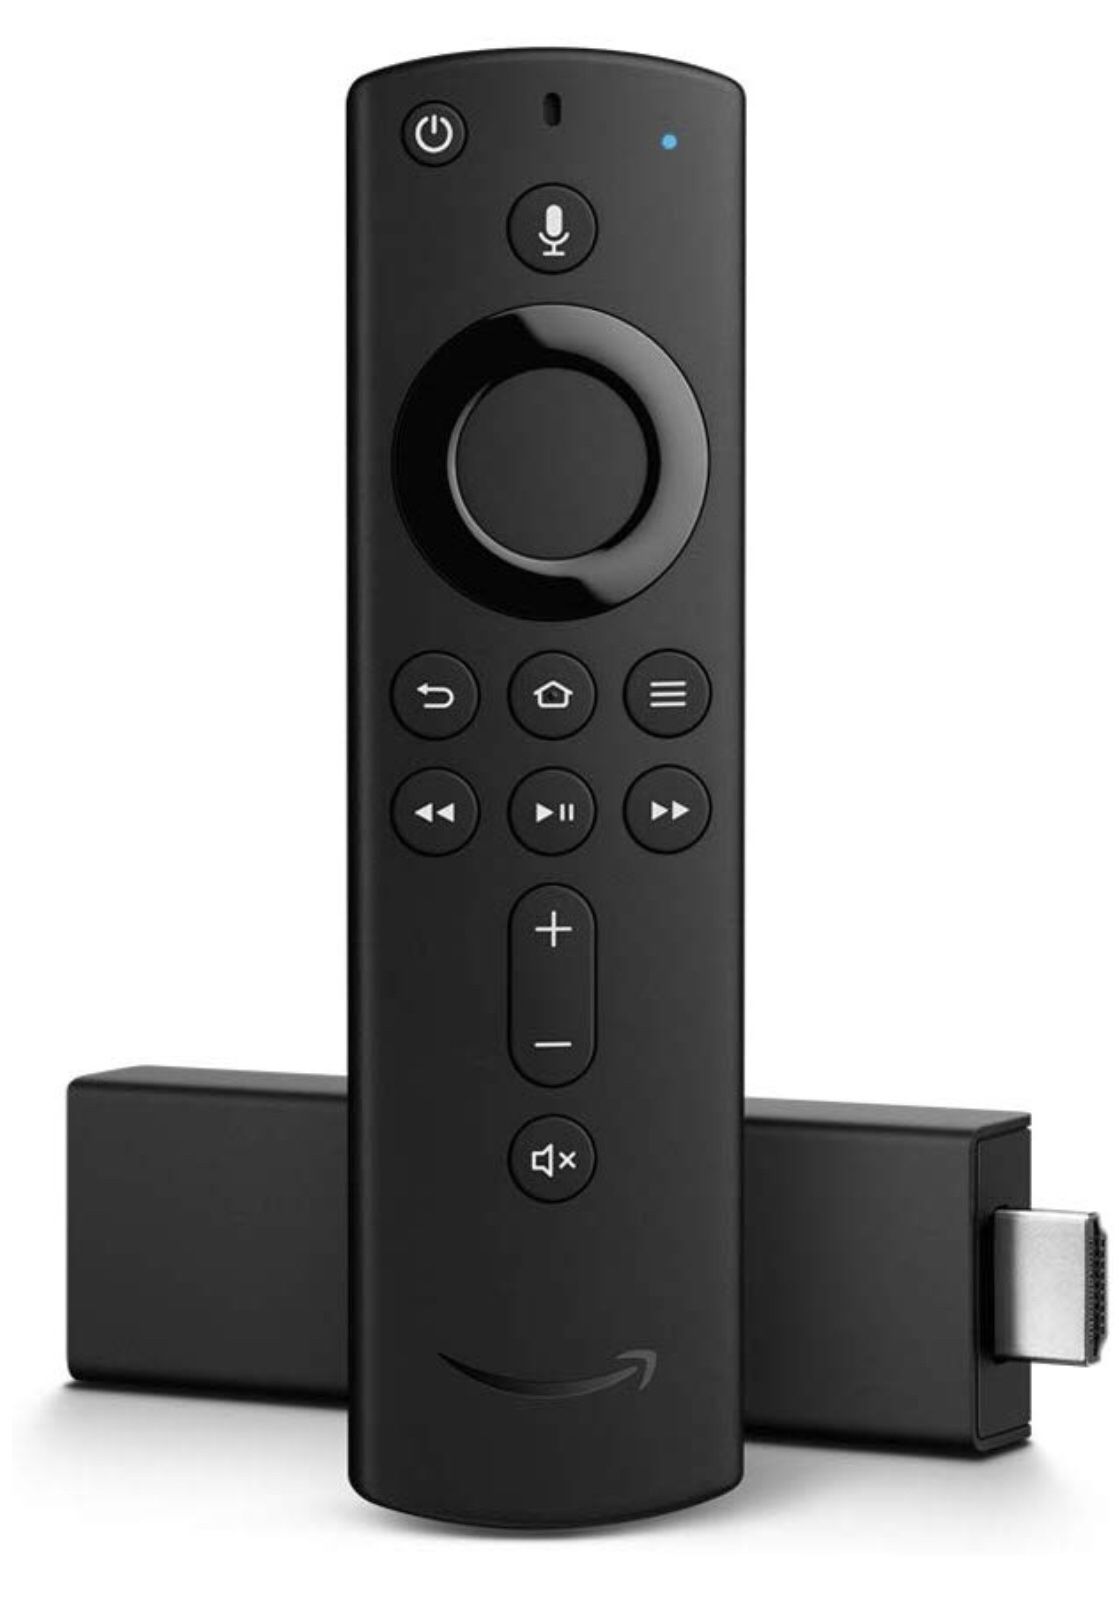 Fire TV Stick 4K with Alexa Voice Remote, streaming media player